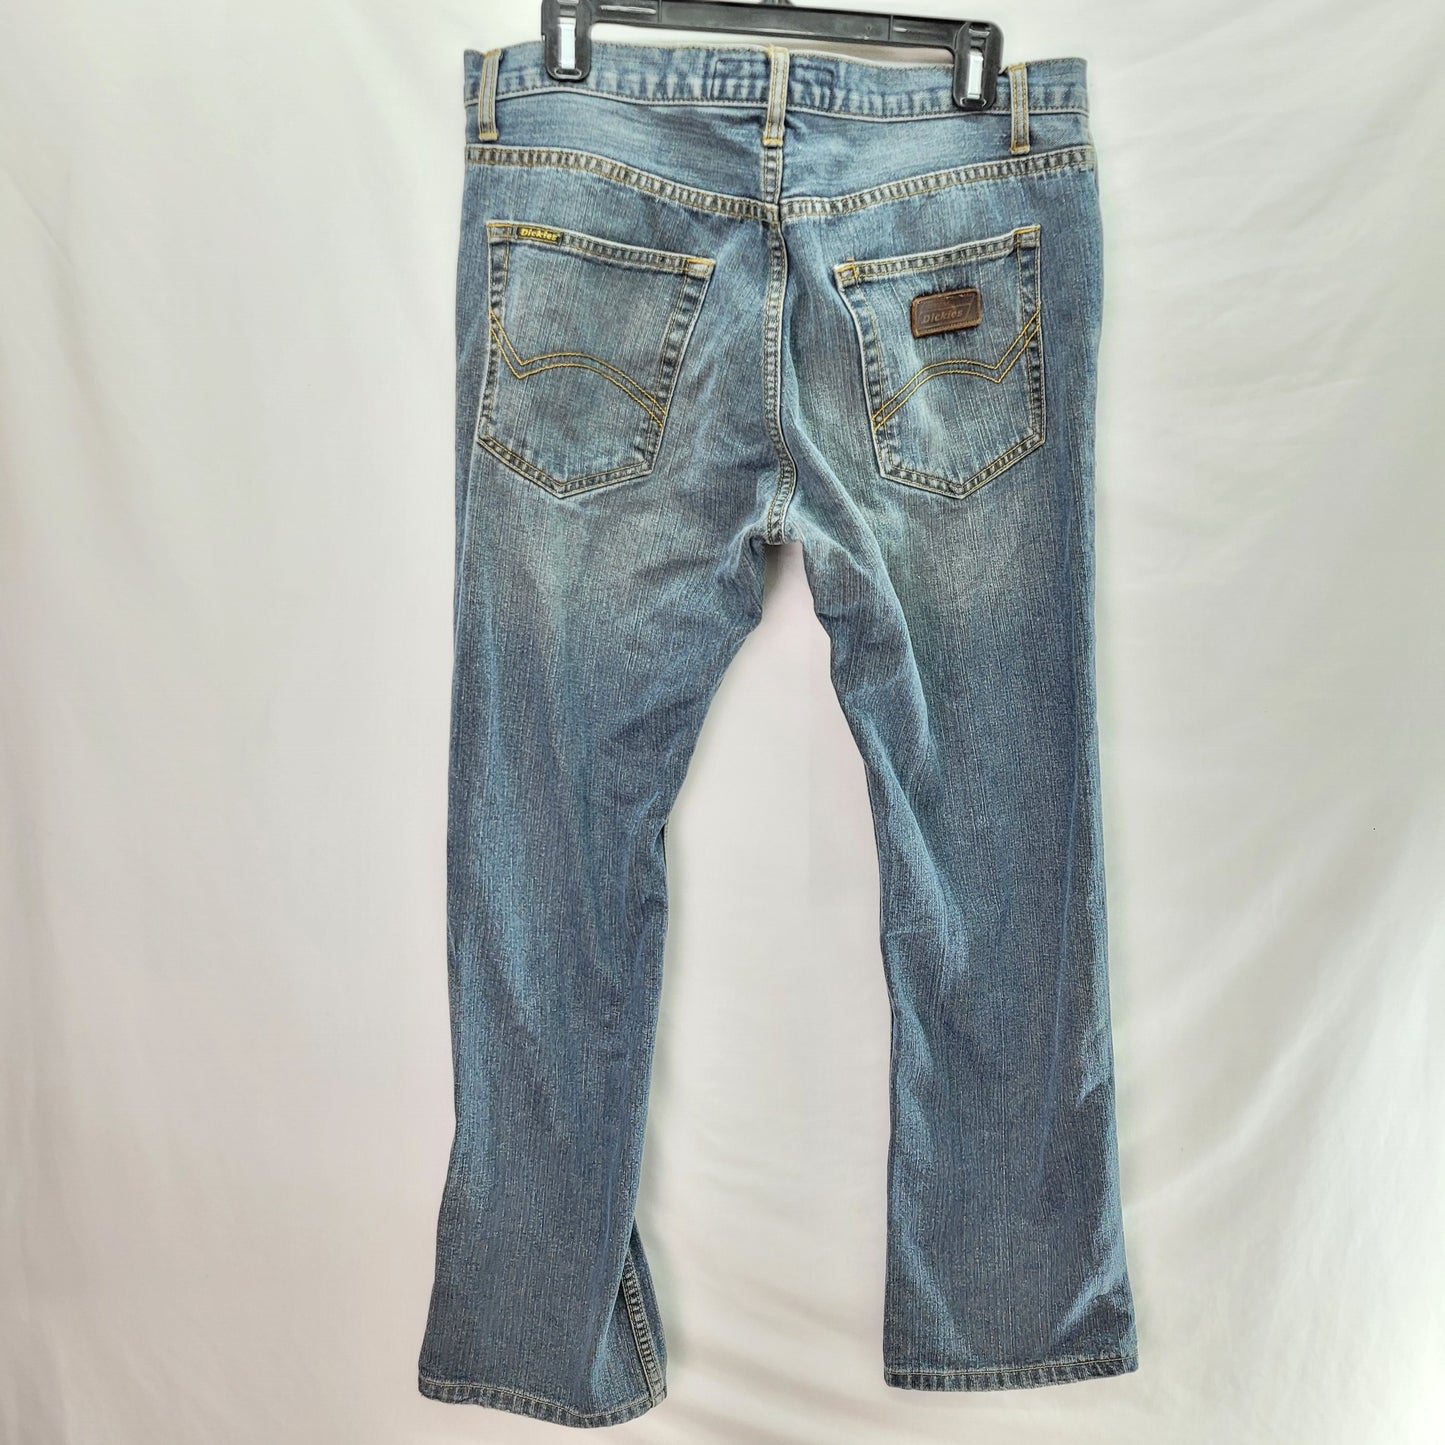 Dickies Men's Original Jeans Light Washed - Size 36